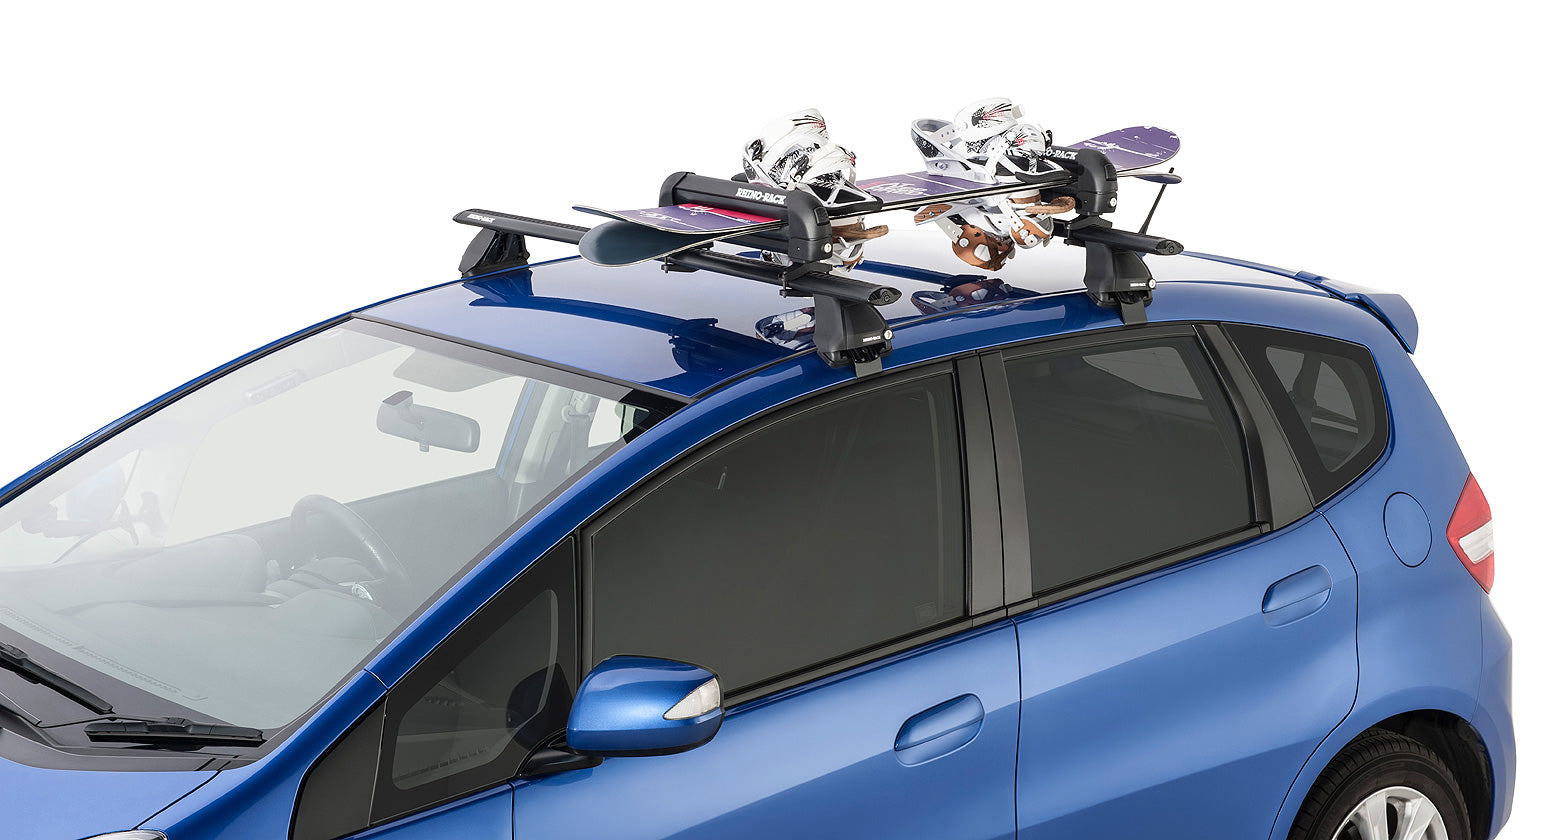 Rhino-Rack Ski And Snowboard Carrier - 2 Skis Or 2 Snowboards